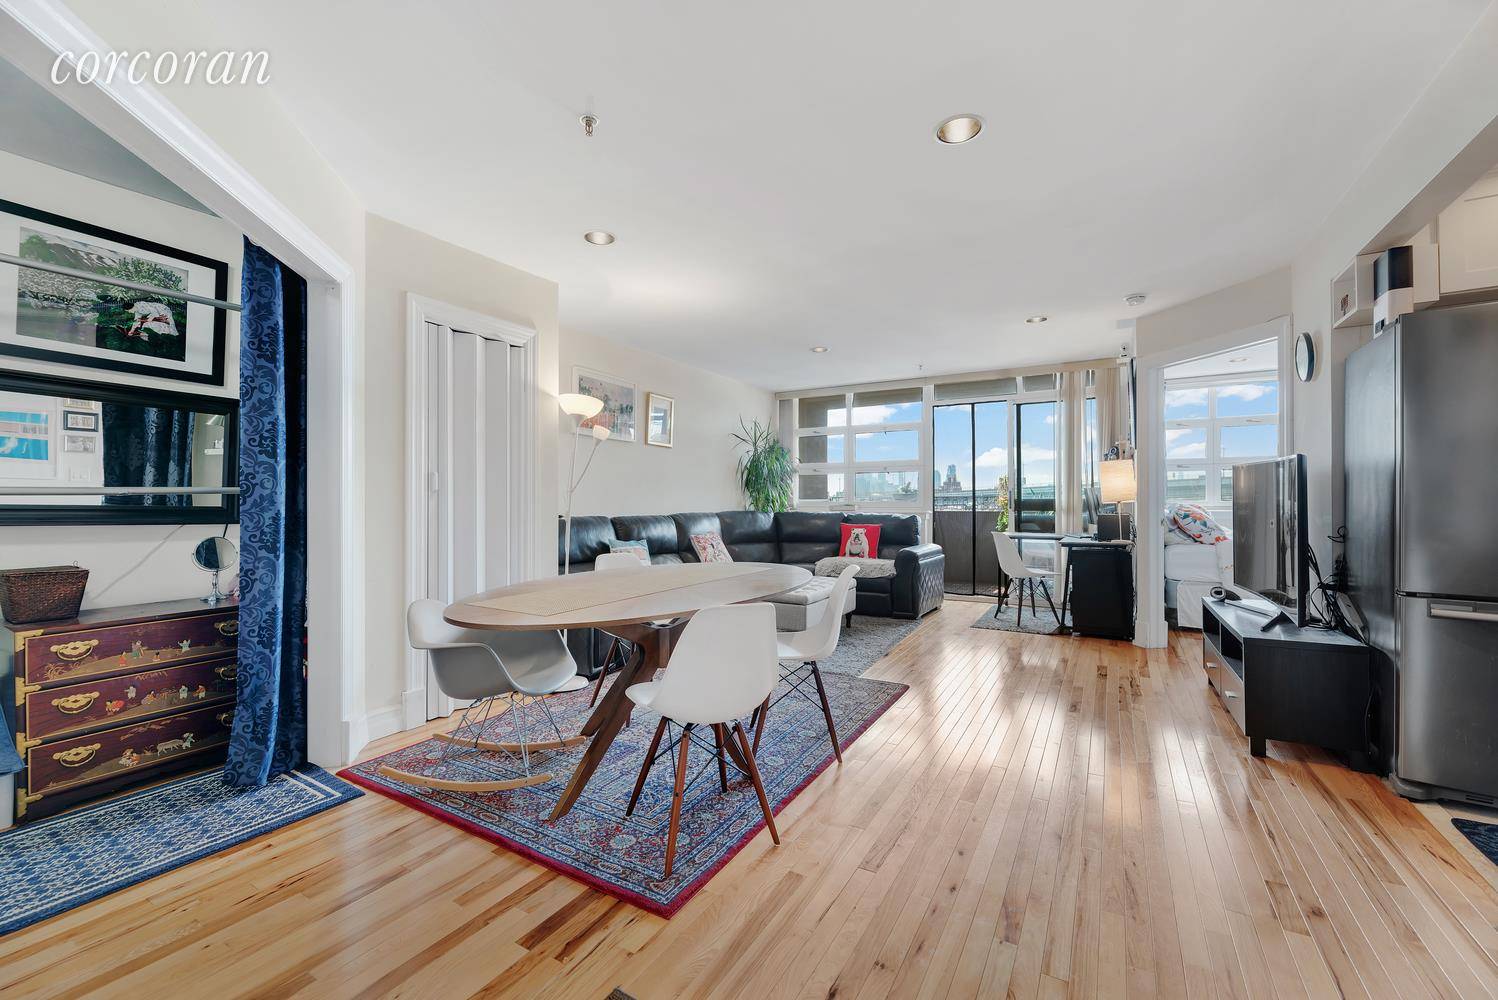 Spacious SW facing one bedroom apartment features private balcony with Manhattan Skyline and Astoria Park views, open floor plan, hardwood floors, renovated kitchen with full size stainless steel appliances and ...